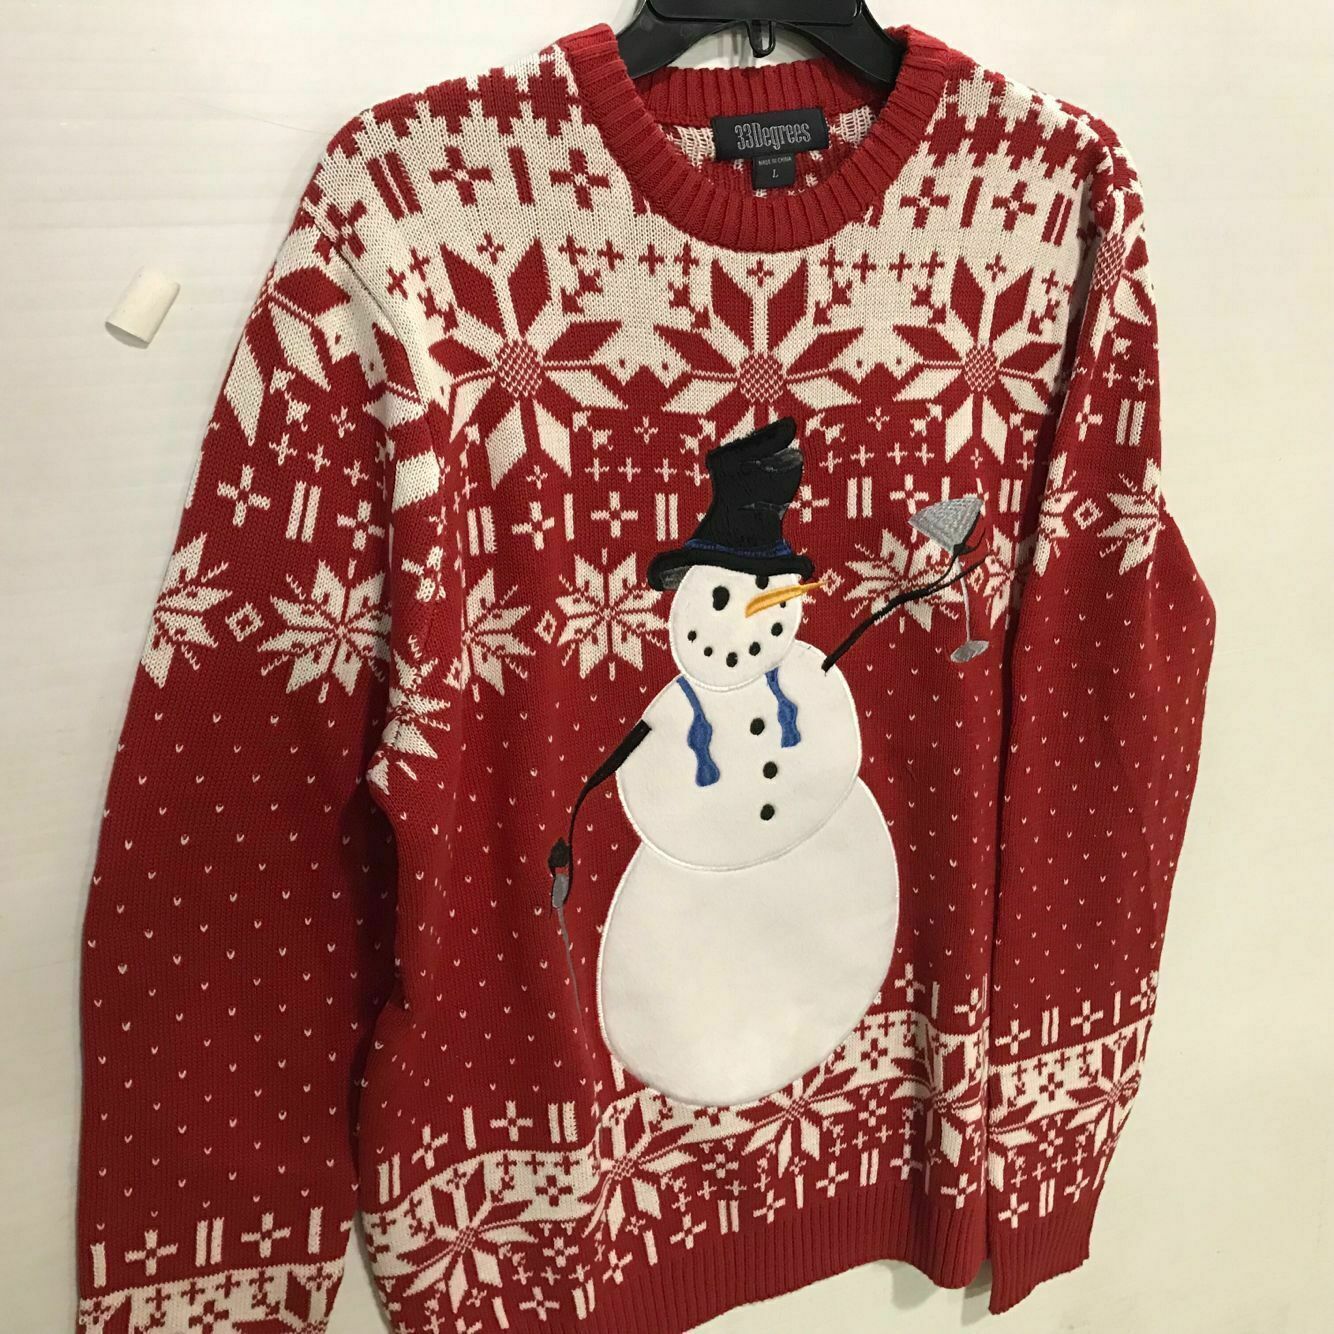 33degrees Christmas snowman sweater - Sweaters